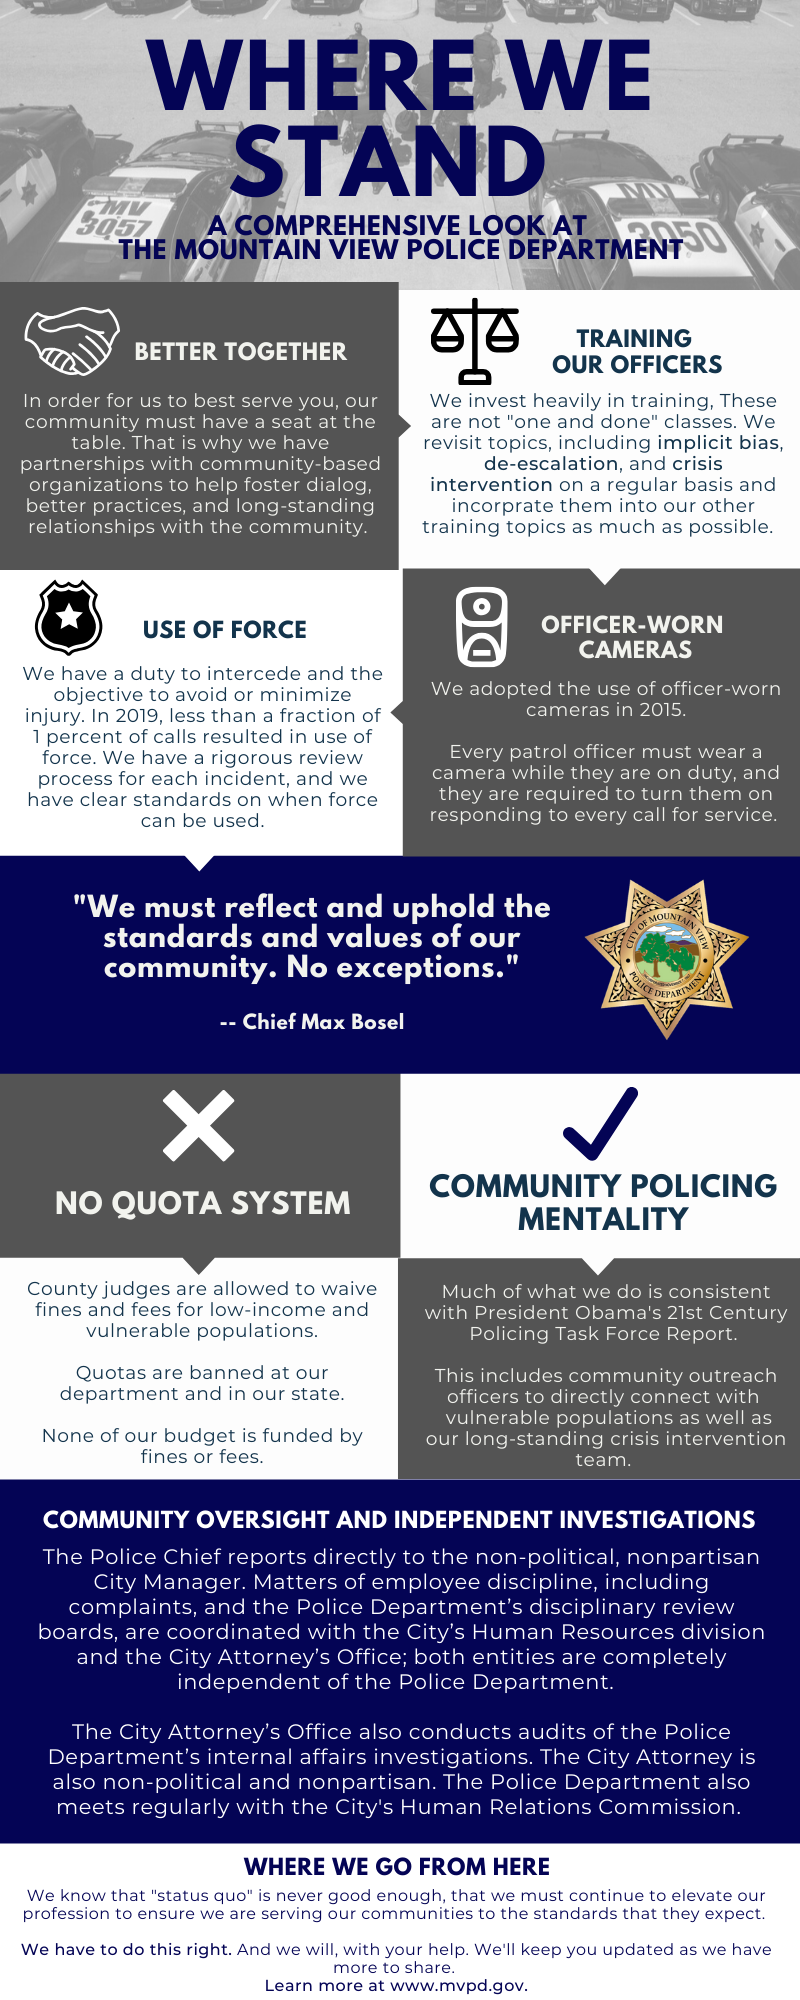 Where We Stand: A Comprehensive Look at the Mountain View Police Department